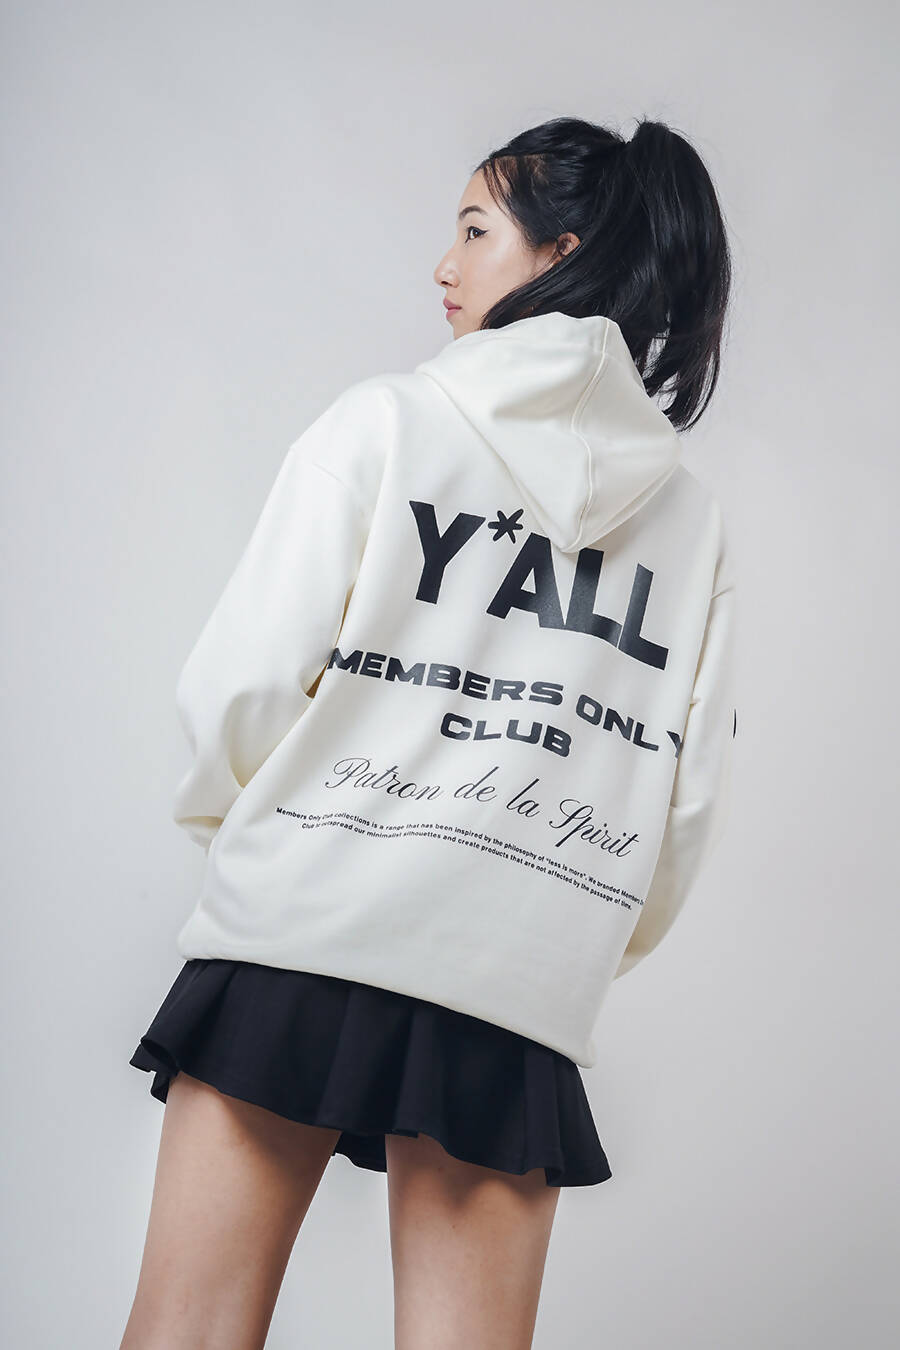 MEMBERS ONLY CLUB - NOT WHITE